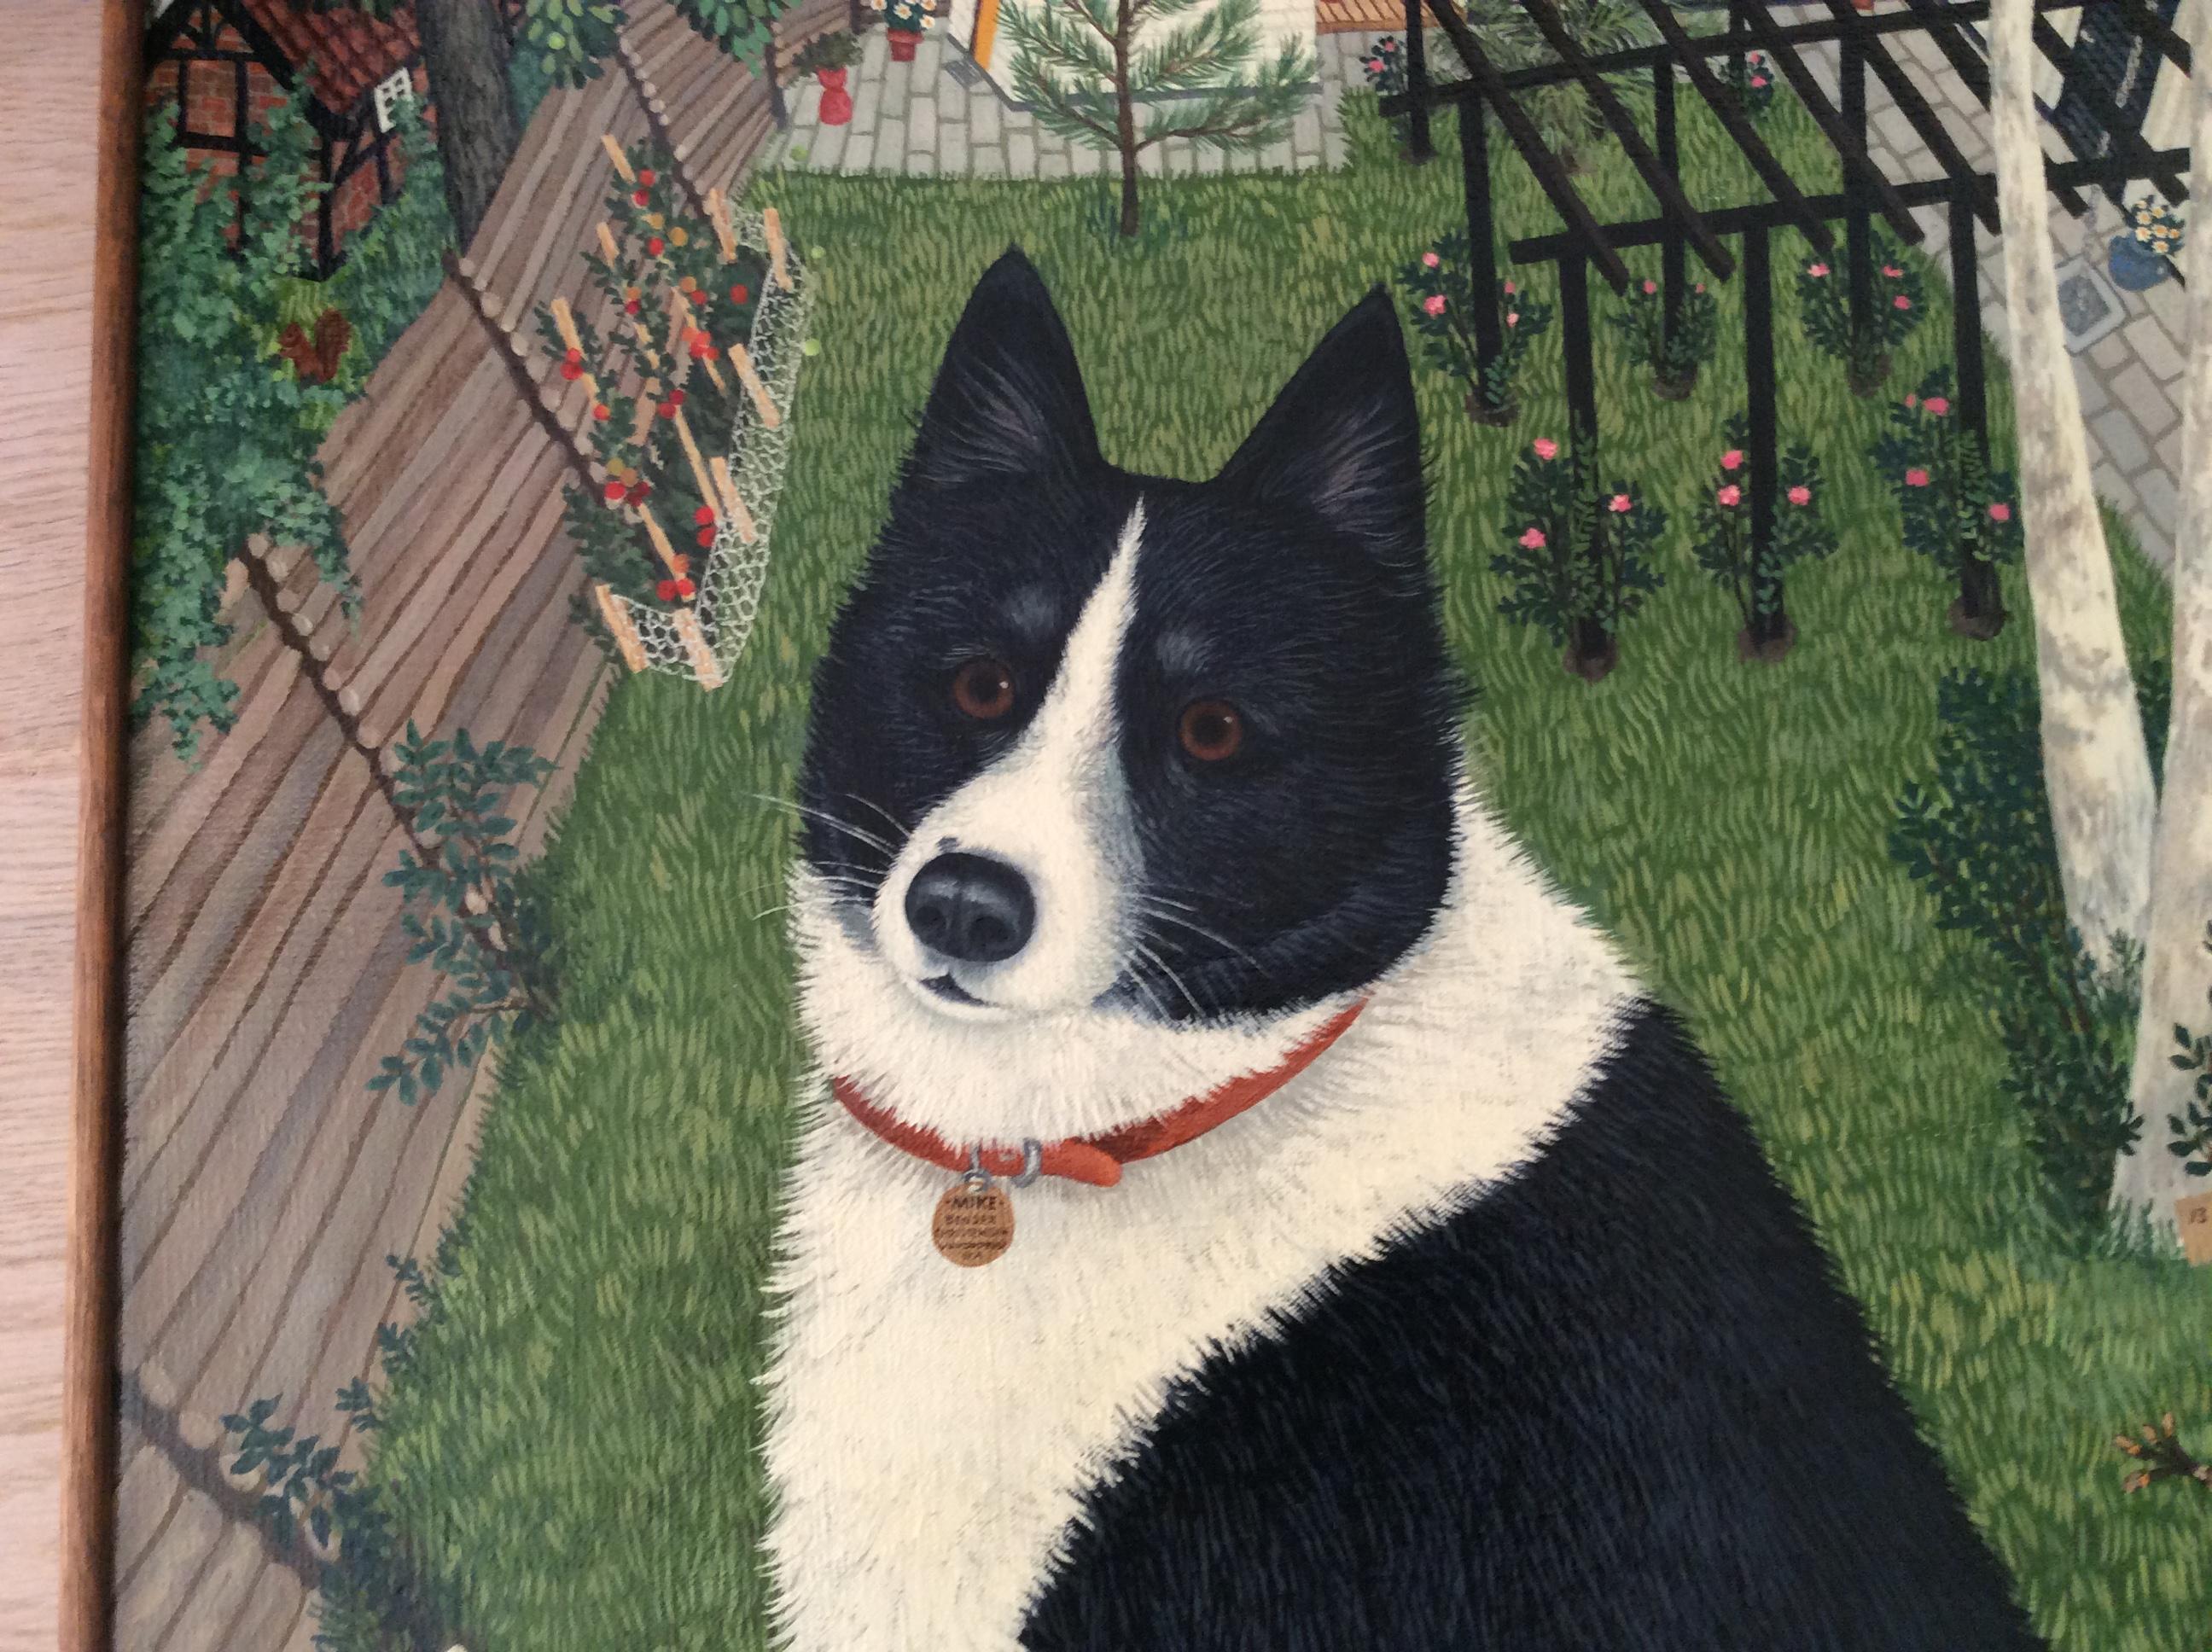 Mimi Vang Olsen is a New York born painter specializing in pet portraits in The Village since the early 1970s.Her work has brought her international recognition and celebrity clientele. And by analyzing the pet’s personality ,dog or cat, you can